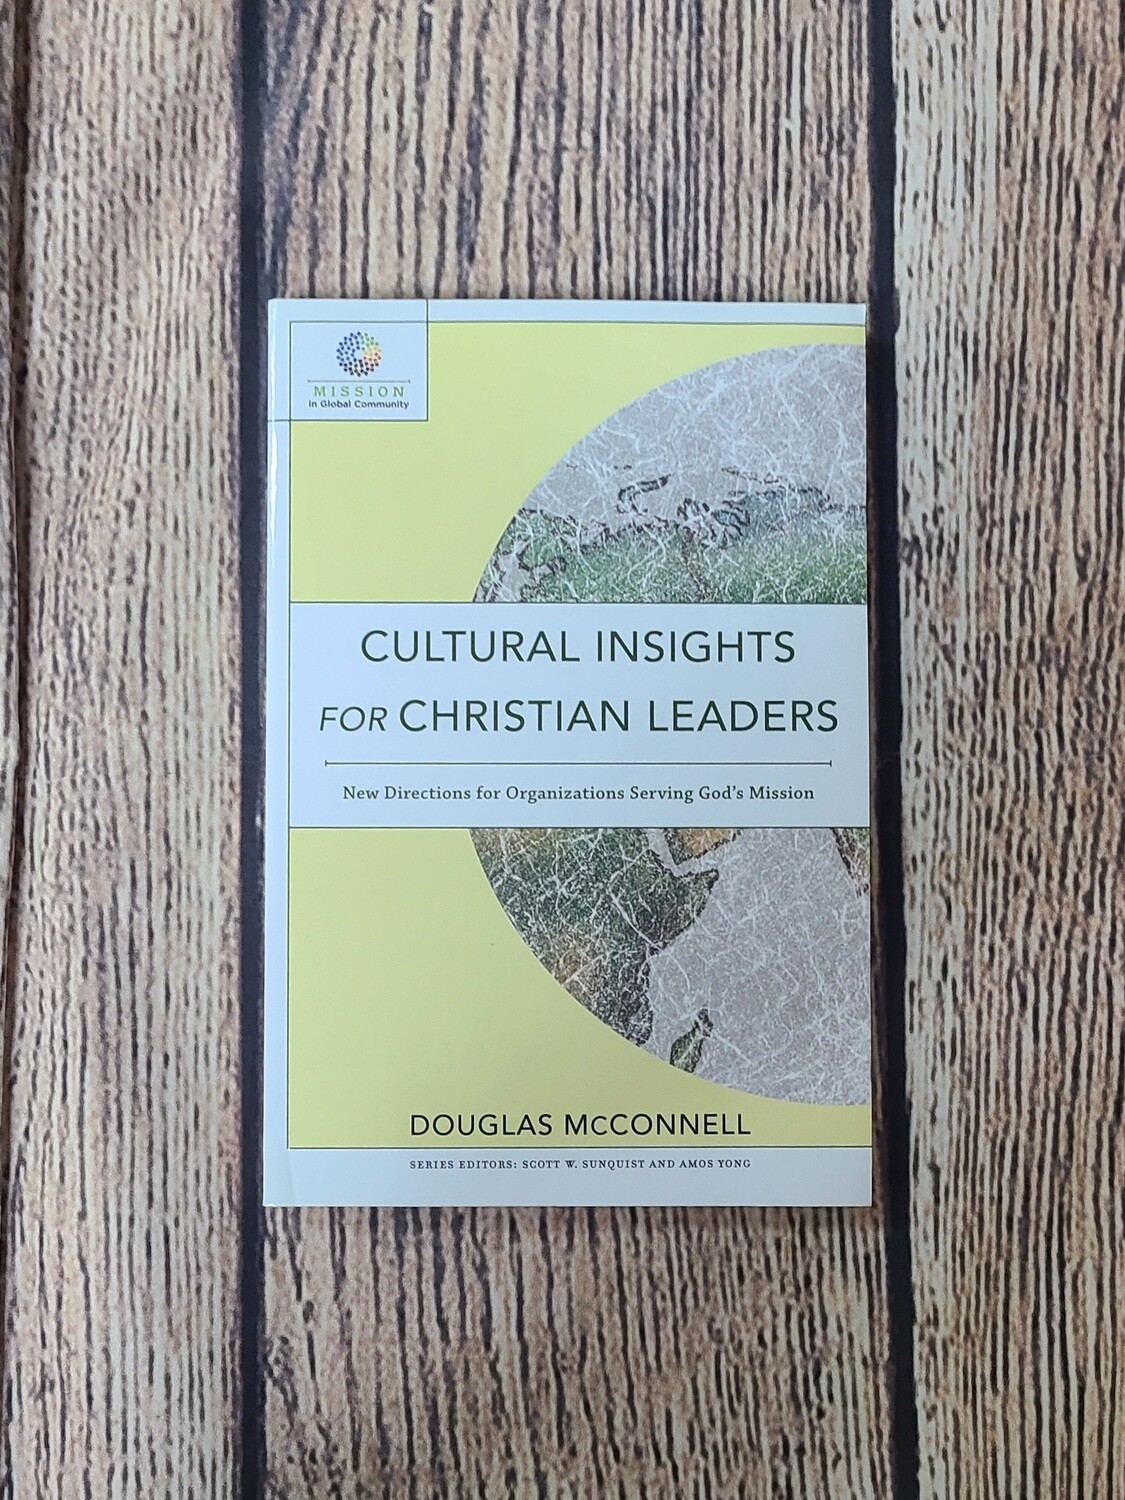 Cultural Insights for Christian Leaders by Douglas McConnell